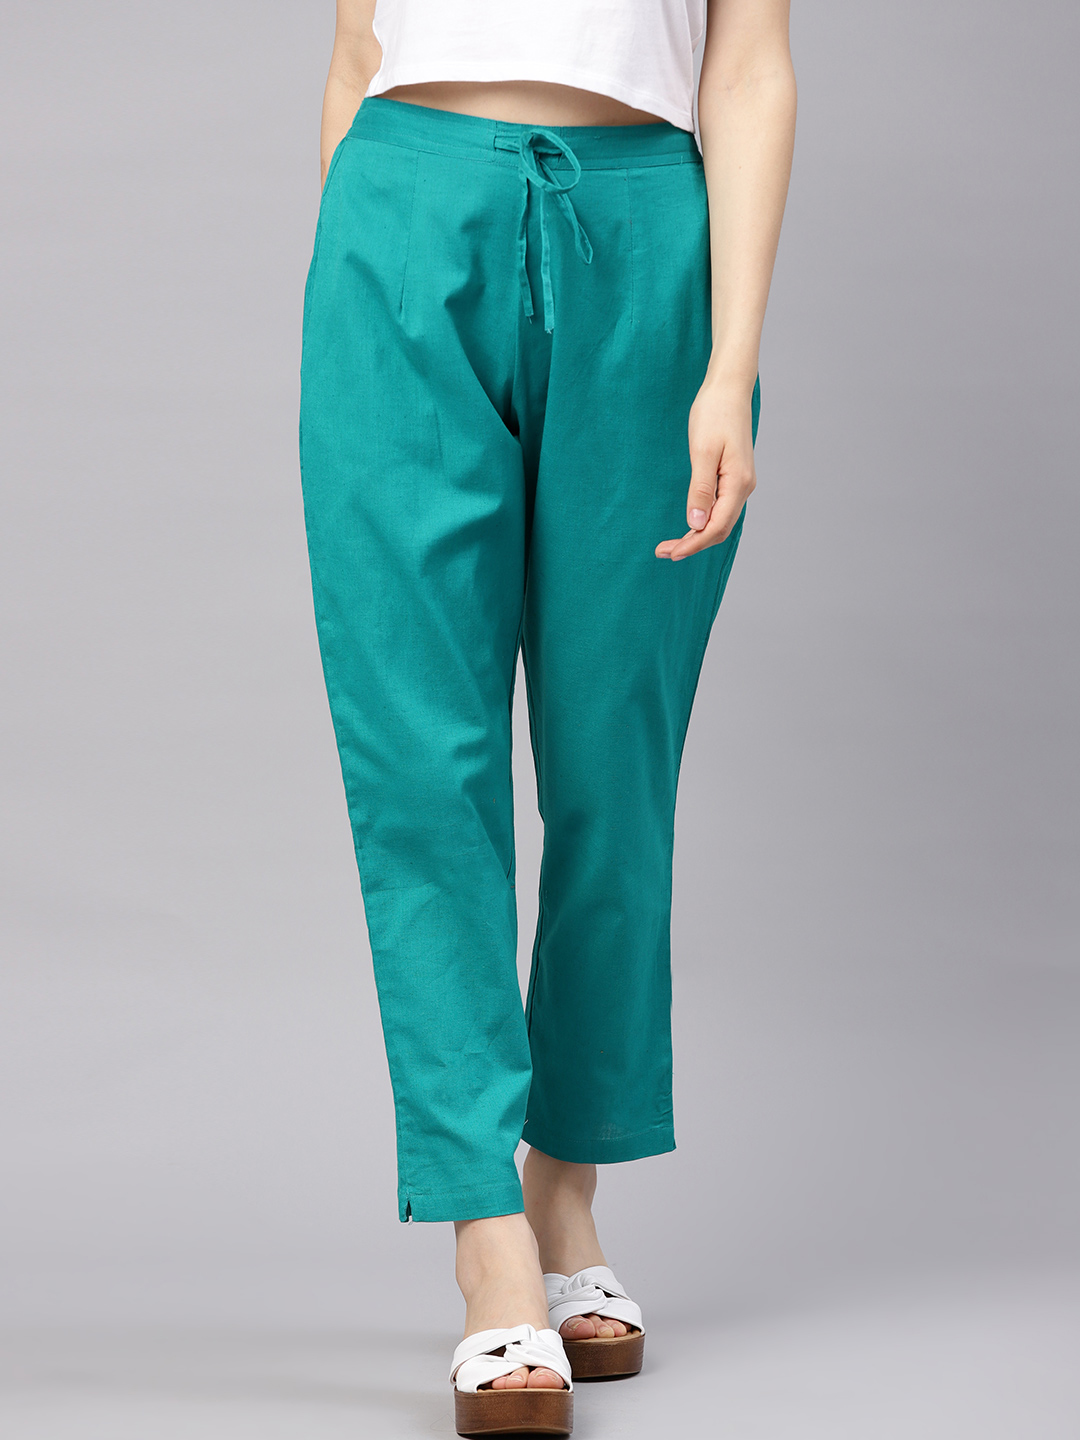 Buy Shree Women Teal Cotton Solid Summer Trouser At Best Price in India ...